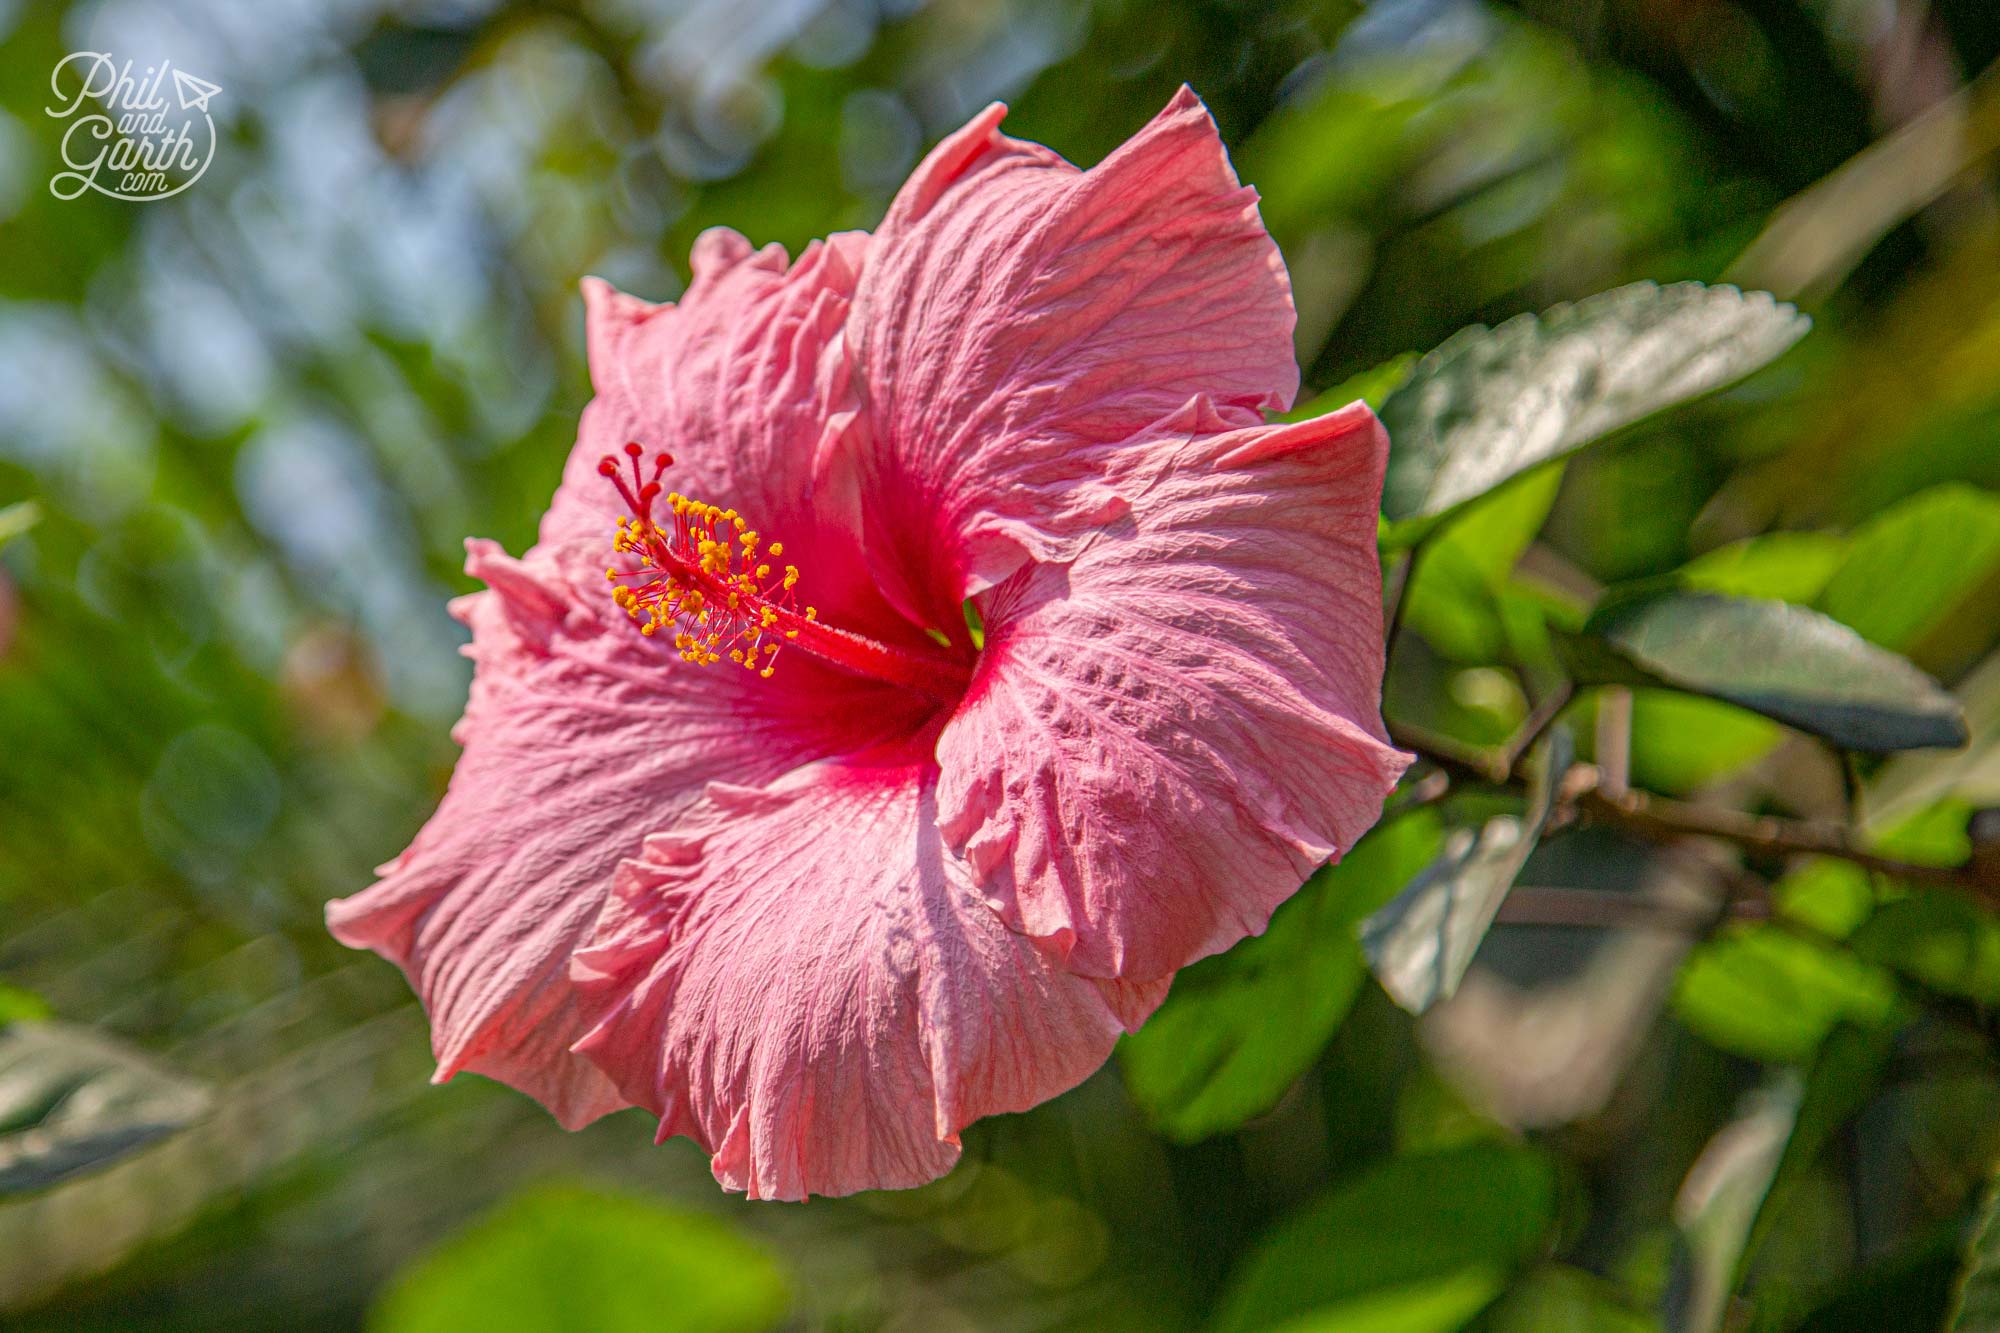 A Hibiscus pink flower - one of Garth's favourite plants